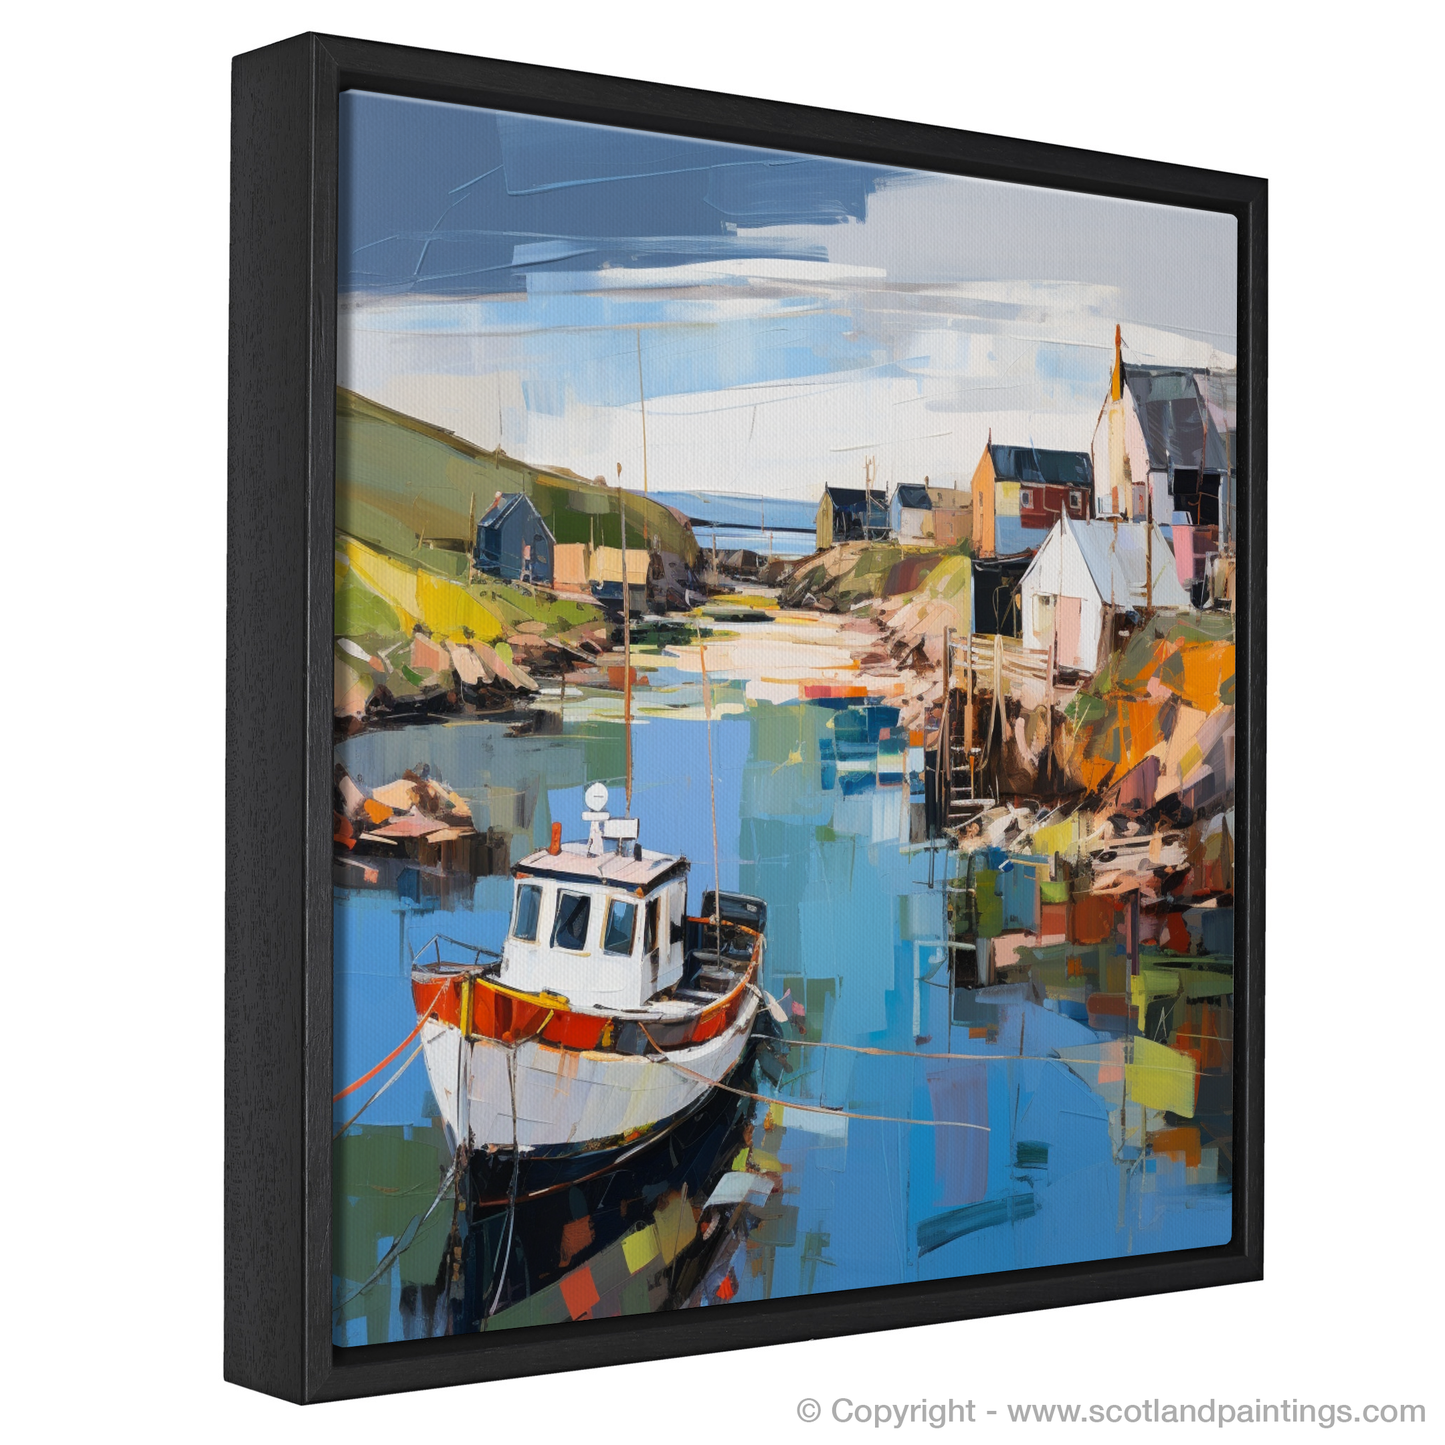 Painting and Art Print of Whitehills Harbour, Aberdeenshire entitled "Vibrant Echoes of Whitehills Harbour".